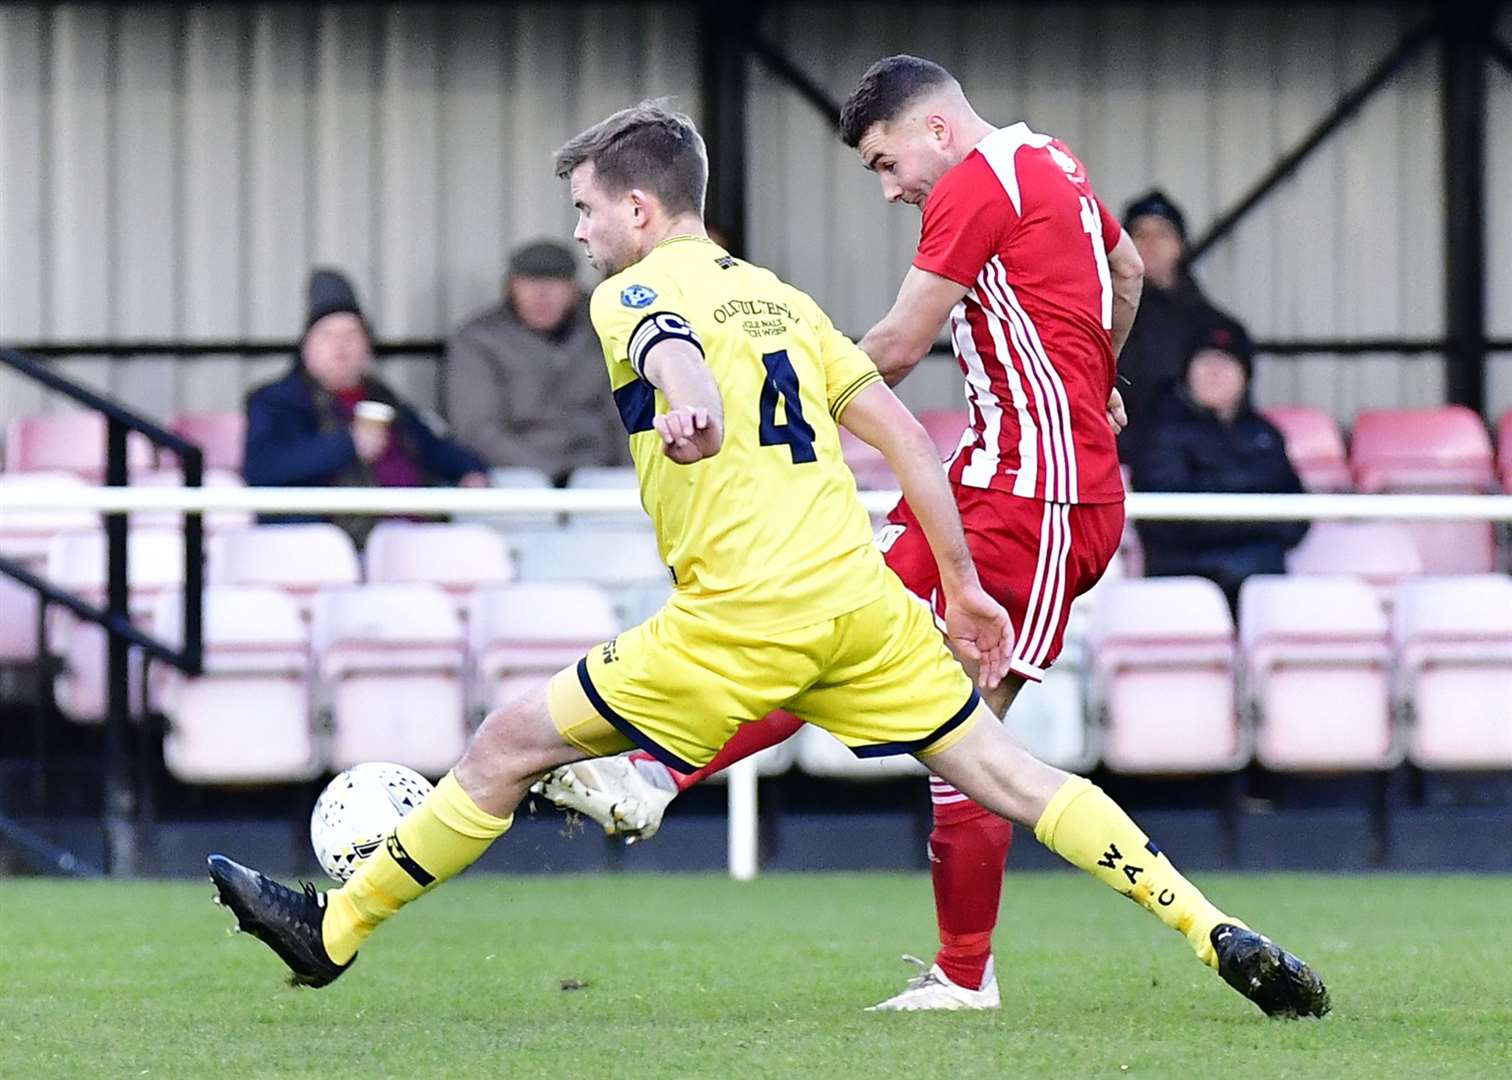 Skipper Alan Farquhar will be putting in goal-saving challenges such as this one on Saturday as boss Tom McKenna confirmed the defender will be back in the team to face Forres Mechanics. Picture: Mel Roger